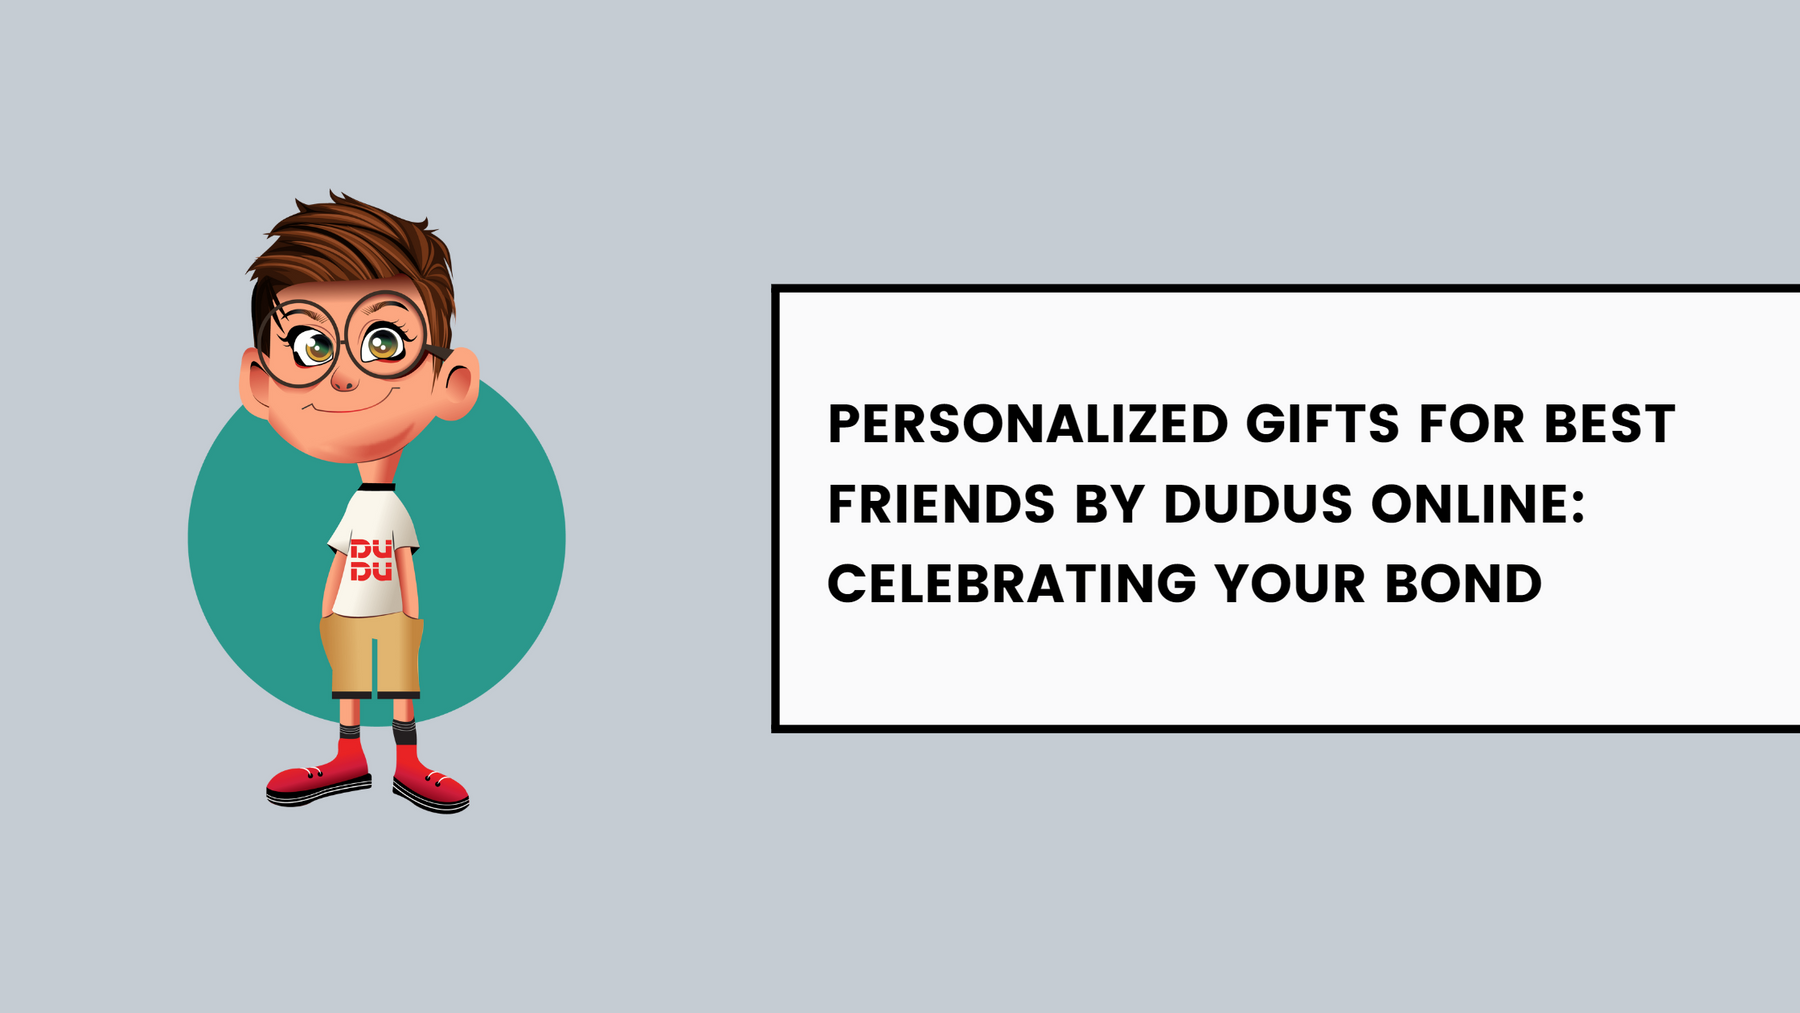 Personalized Gifts For Best Friends By Dudus Online: Celebrating Your Bond